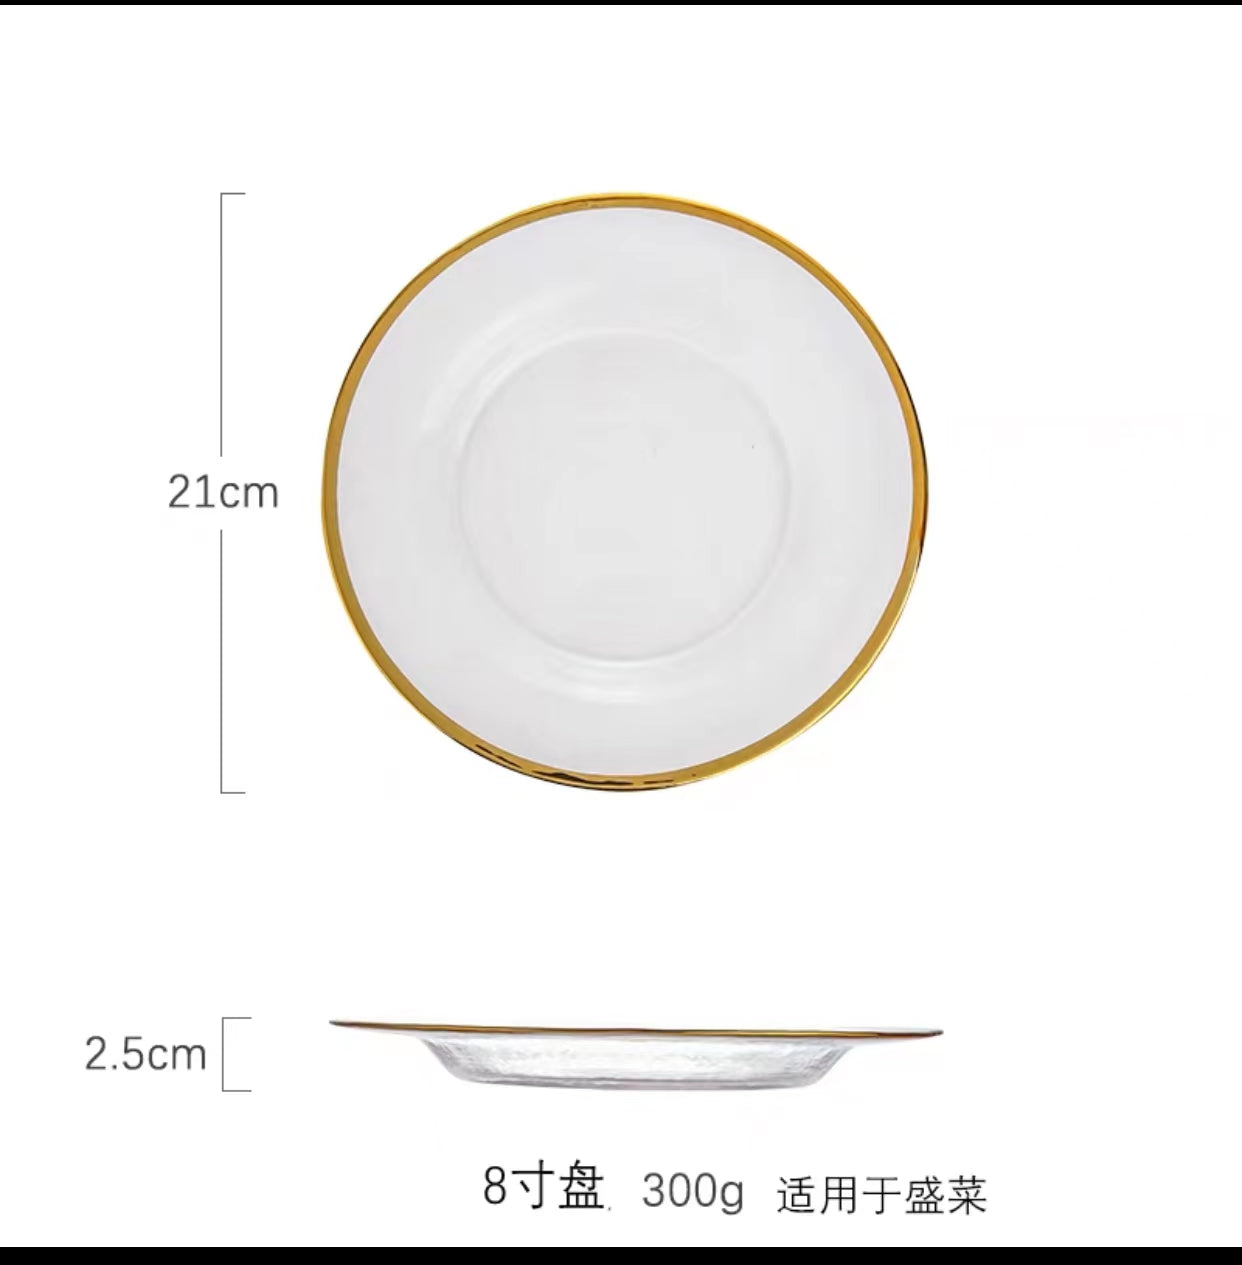 4 Pieces Opaque Plate Collection Set - 4 Seasons Home Gadgets